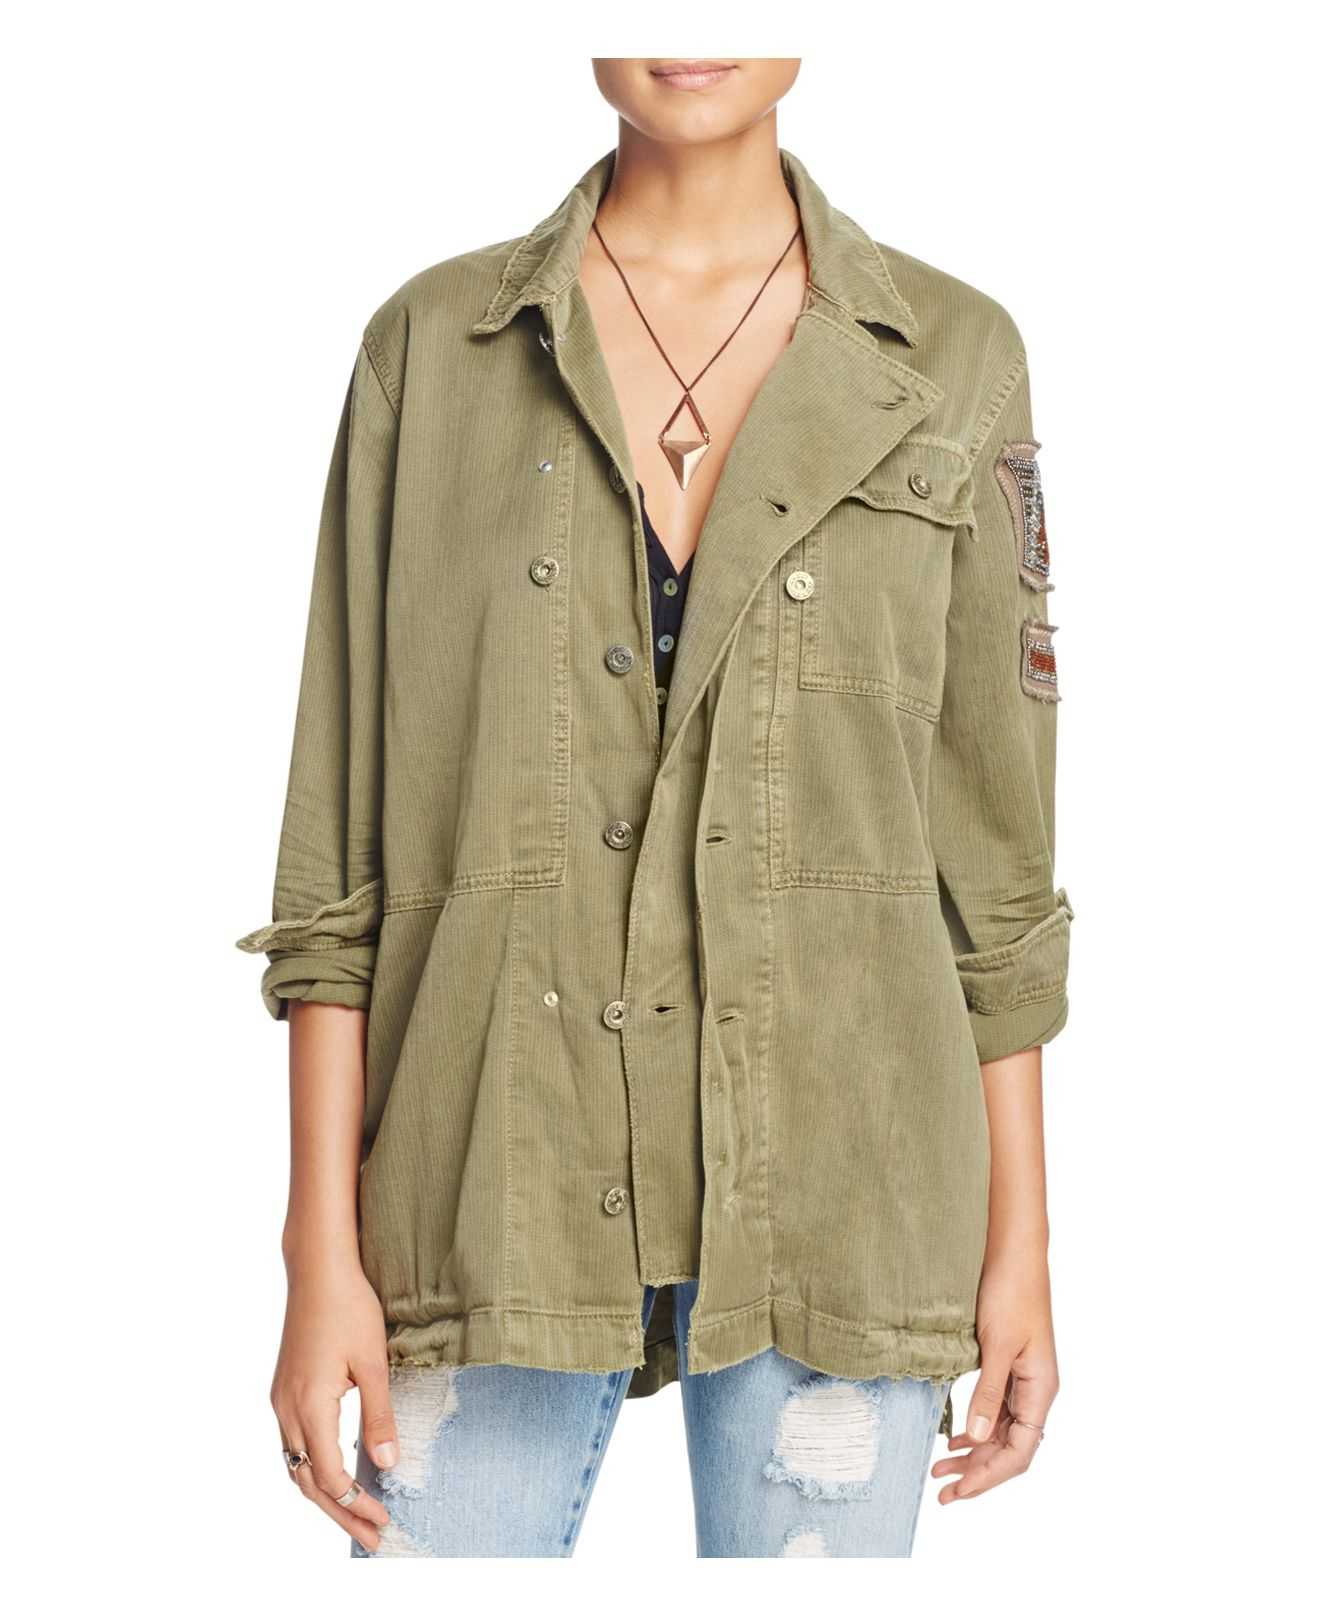 Free People Embellished Military Jacket in Green Lyst